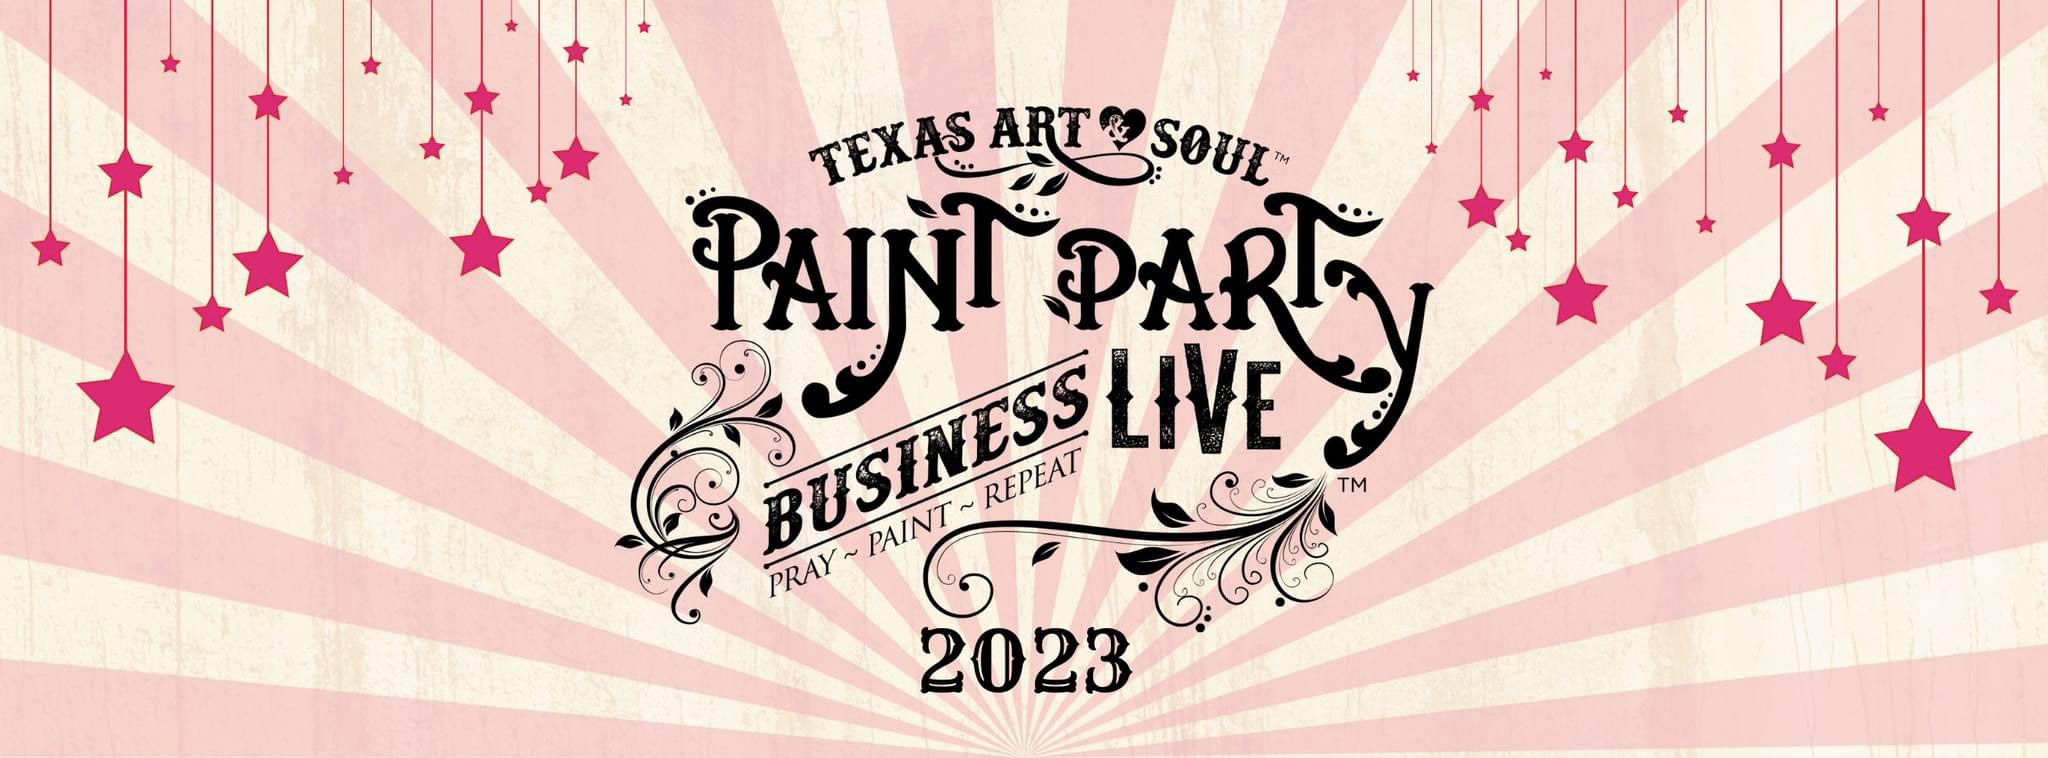 How My Paint Party Business Started - God's Plan Full Circle - Texas Art  and Soul - Create a Paint Party Business Online